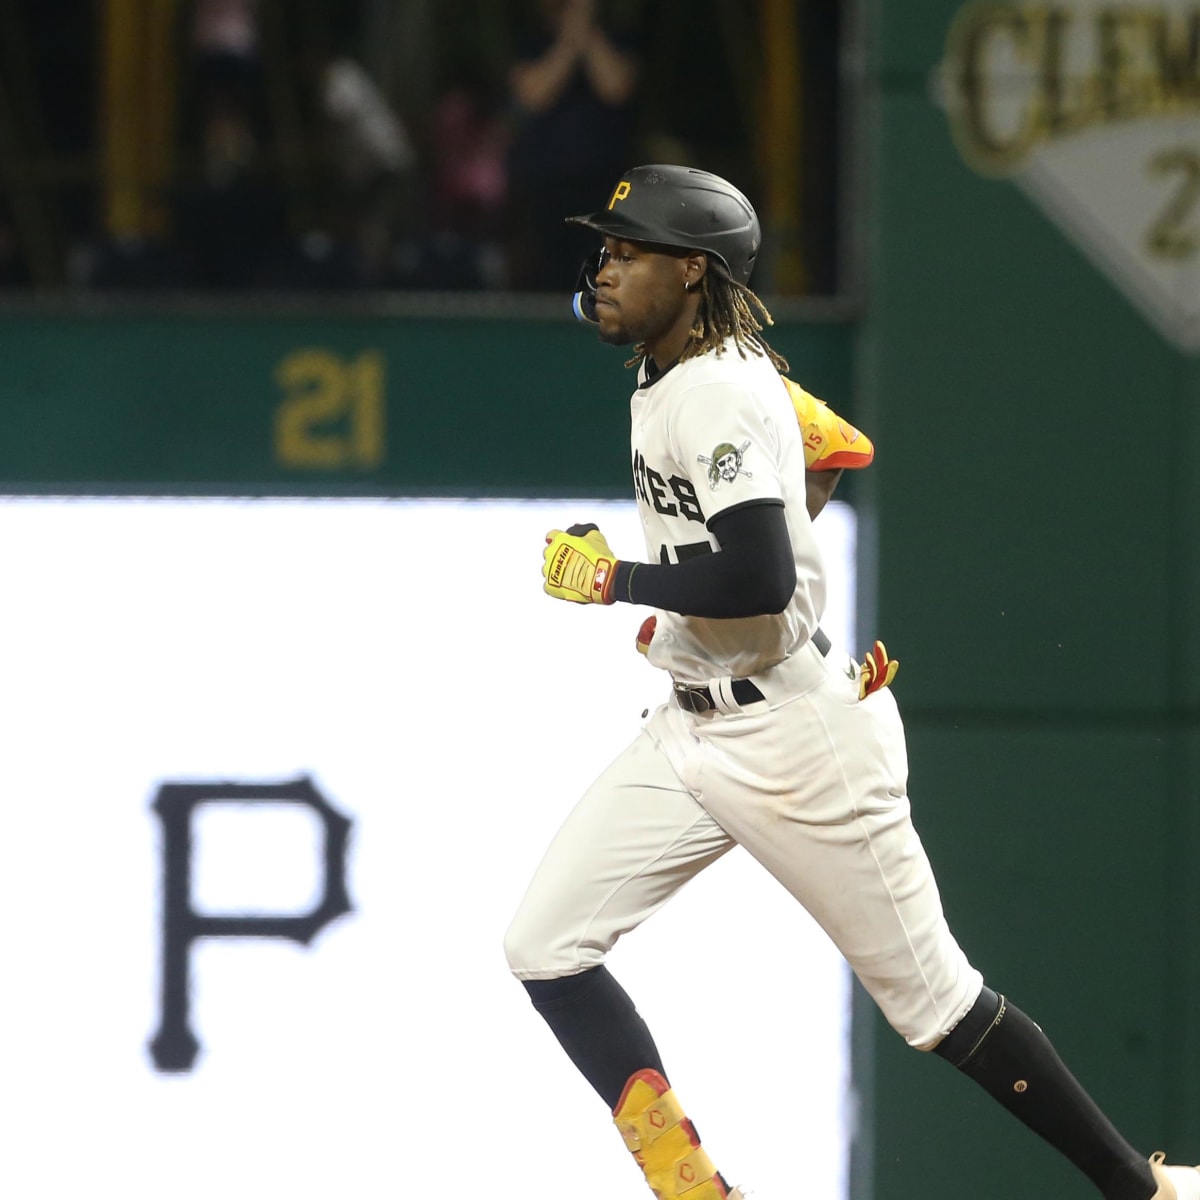 Pirates' Oneil Cruz breaks record with 122.4 mile-per-hour rocket